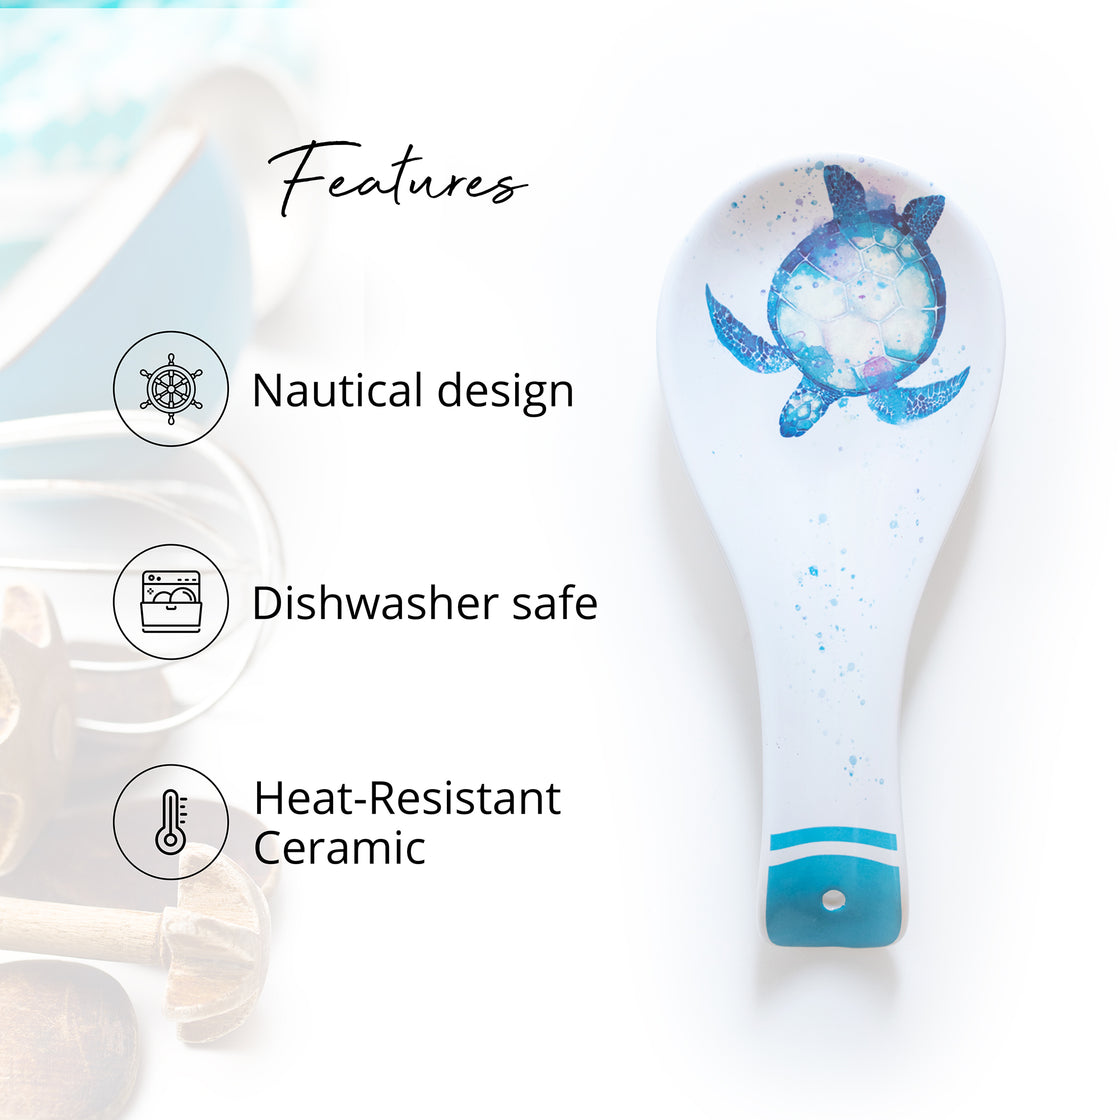 rengöra sea turtle spoon rest embodies a charming nautical design, combining both form and function. Crafted from heat-resistant ceramic, it can endure the demands of your kitchen while being dishwasher-safe for easy cleanup